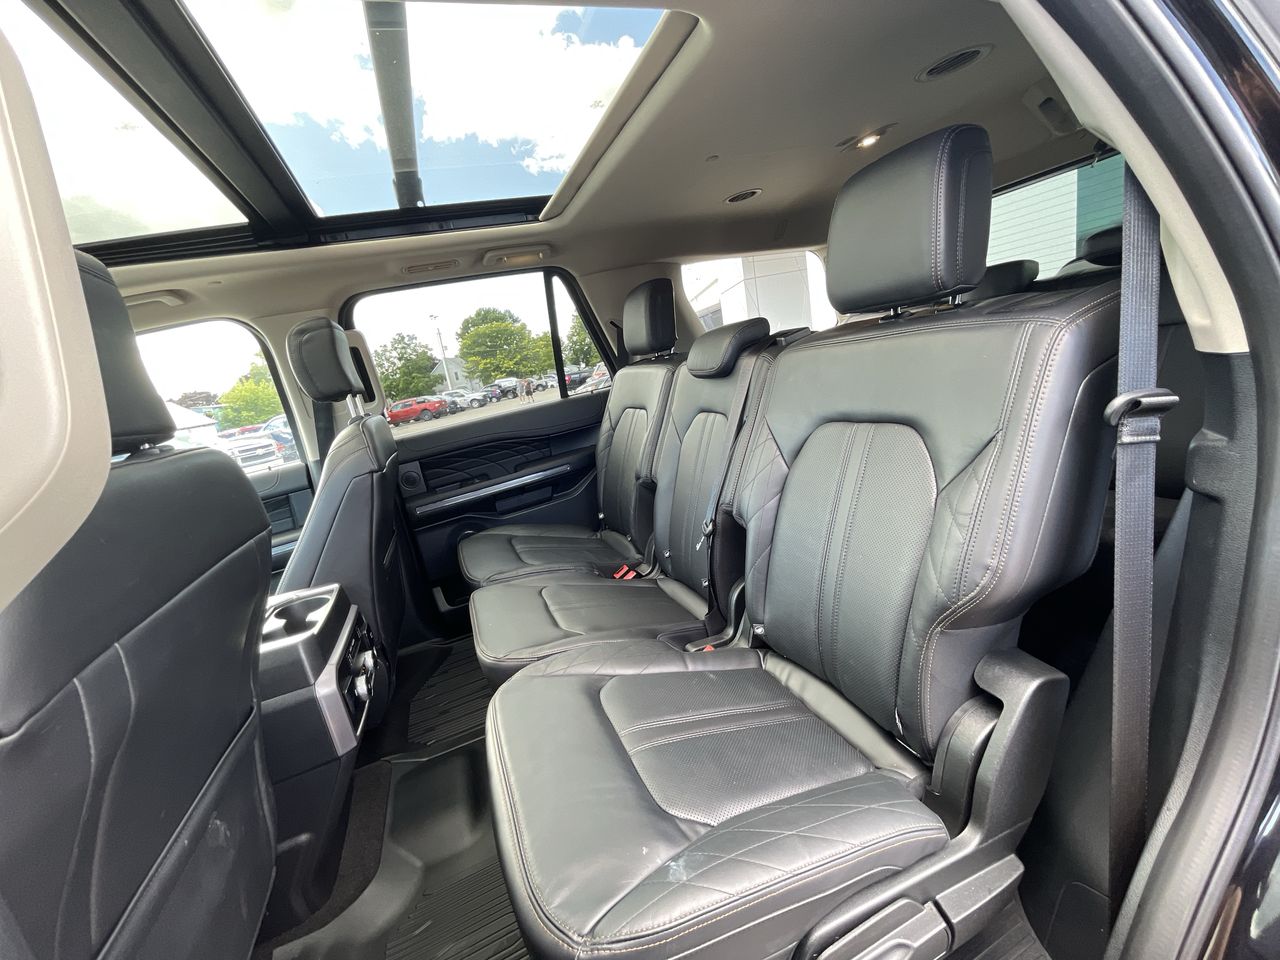 2021 Ford Expedition - P21237 Full Image 23